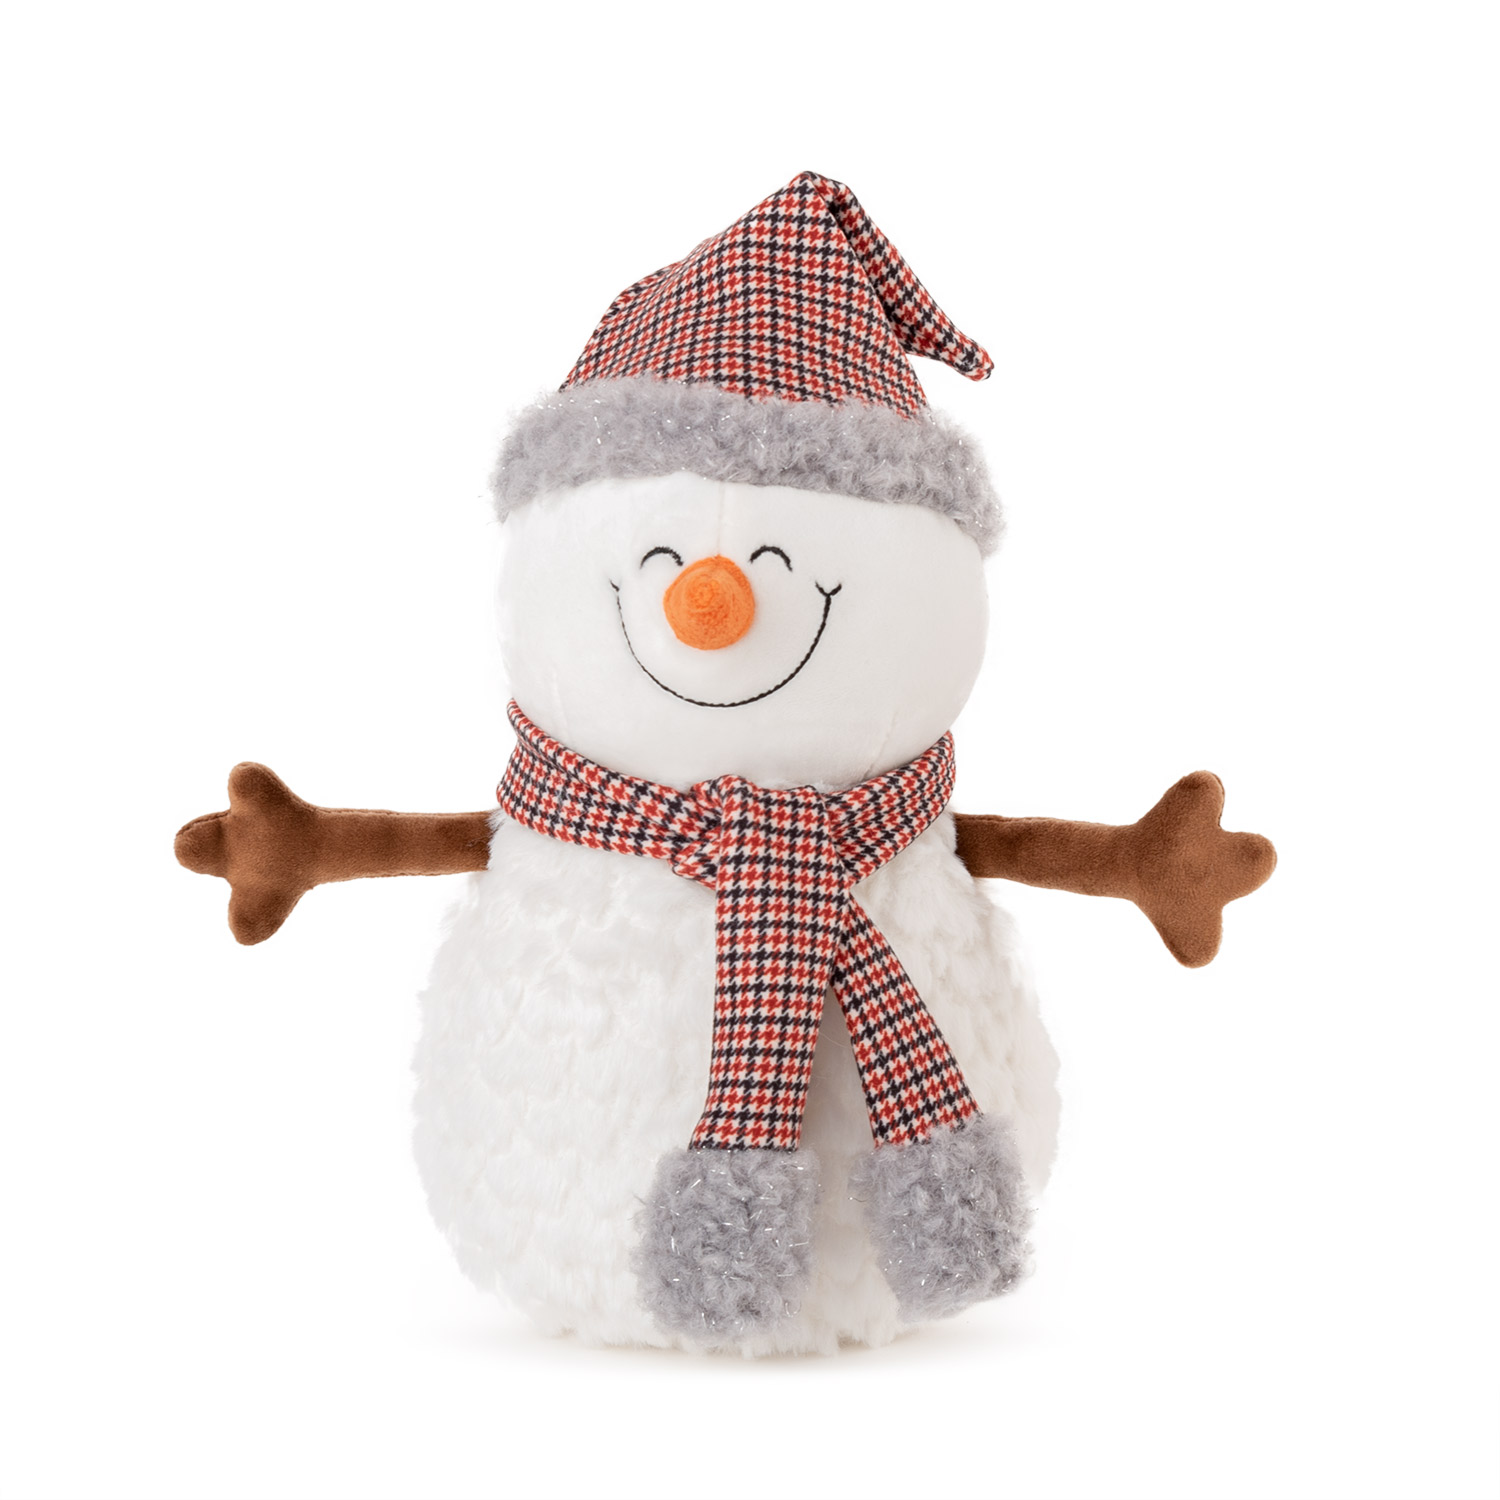 Snowman with hat and scarf - Red